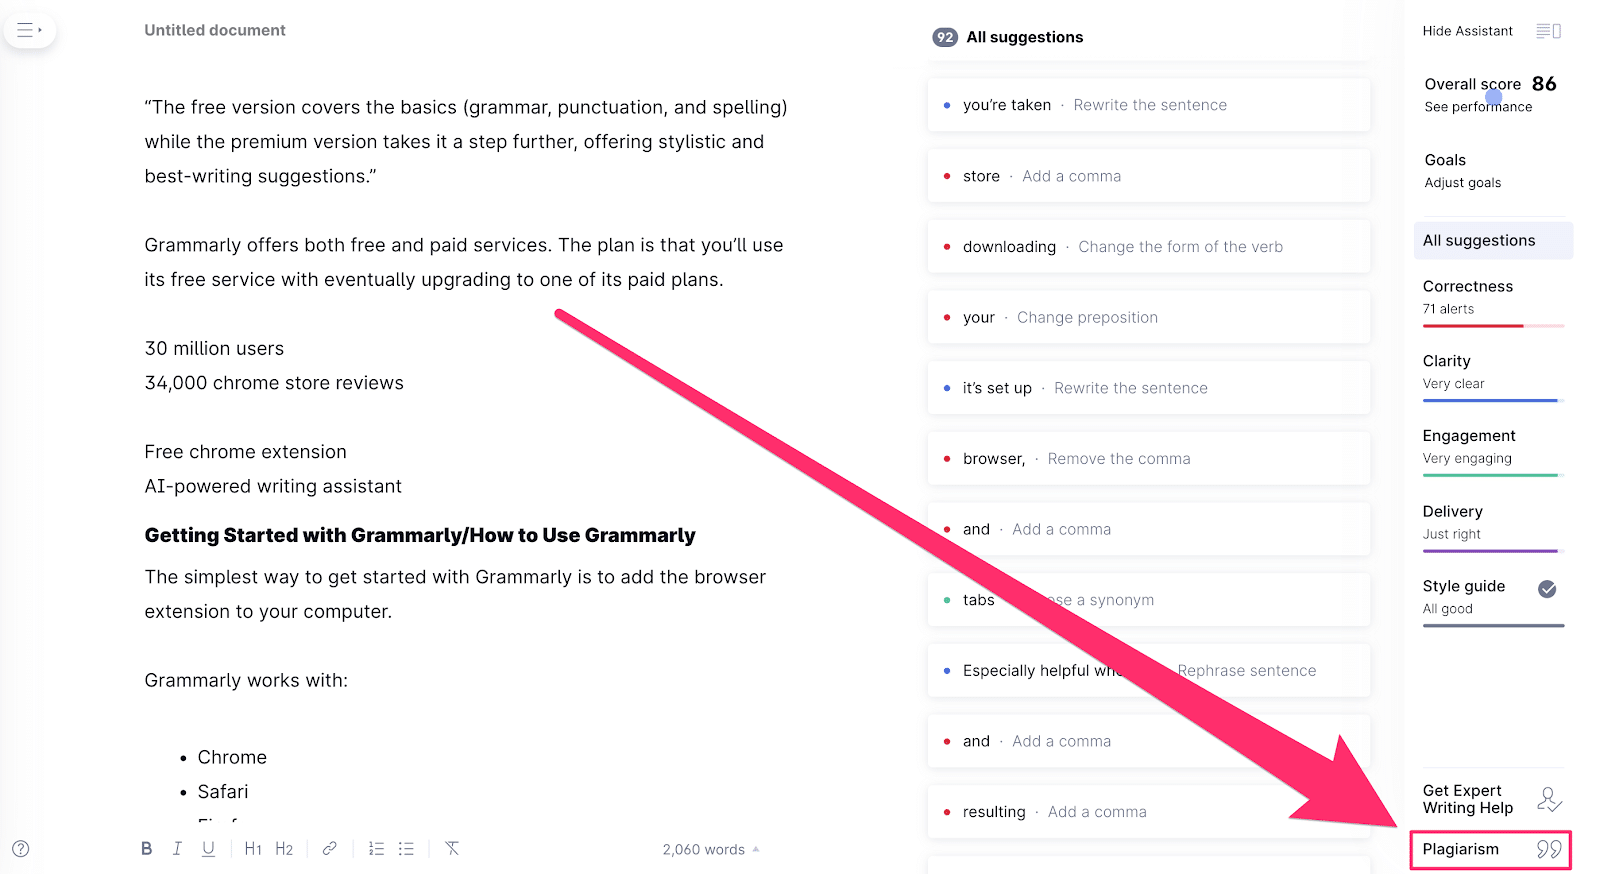 where you can find the plagiarism checker in the app